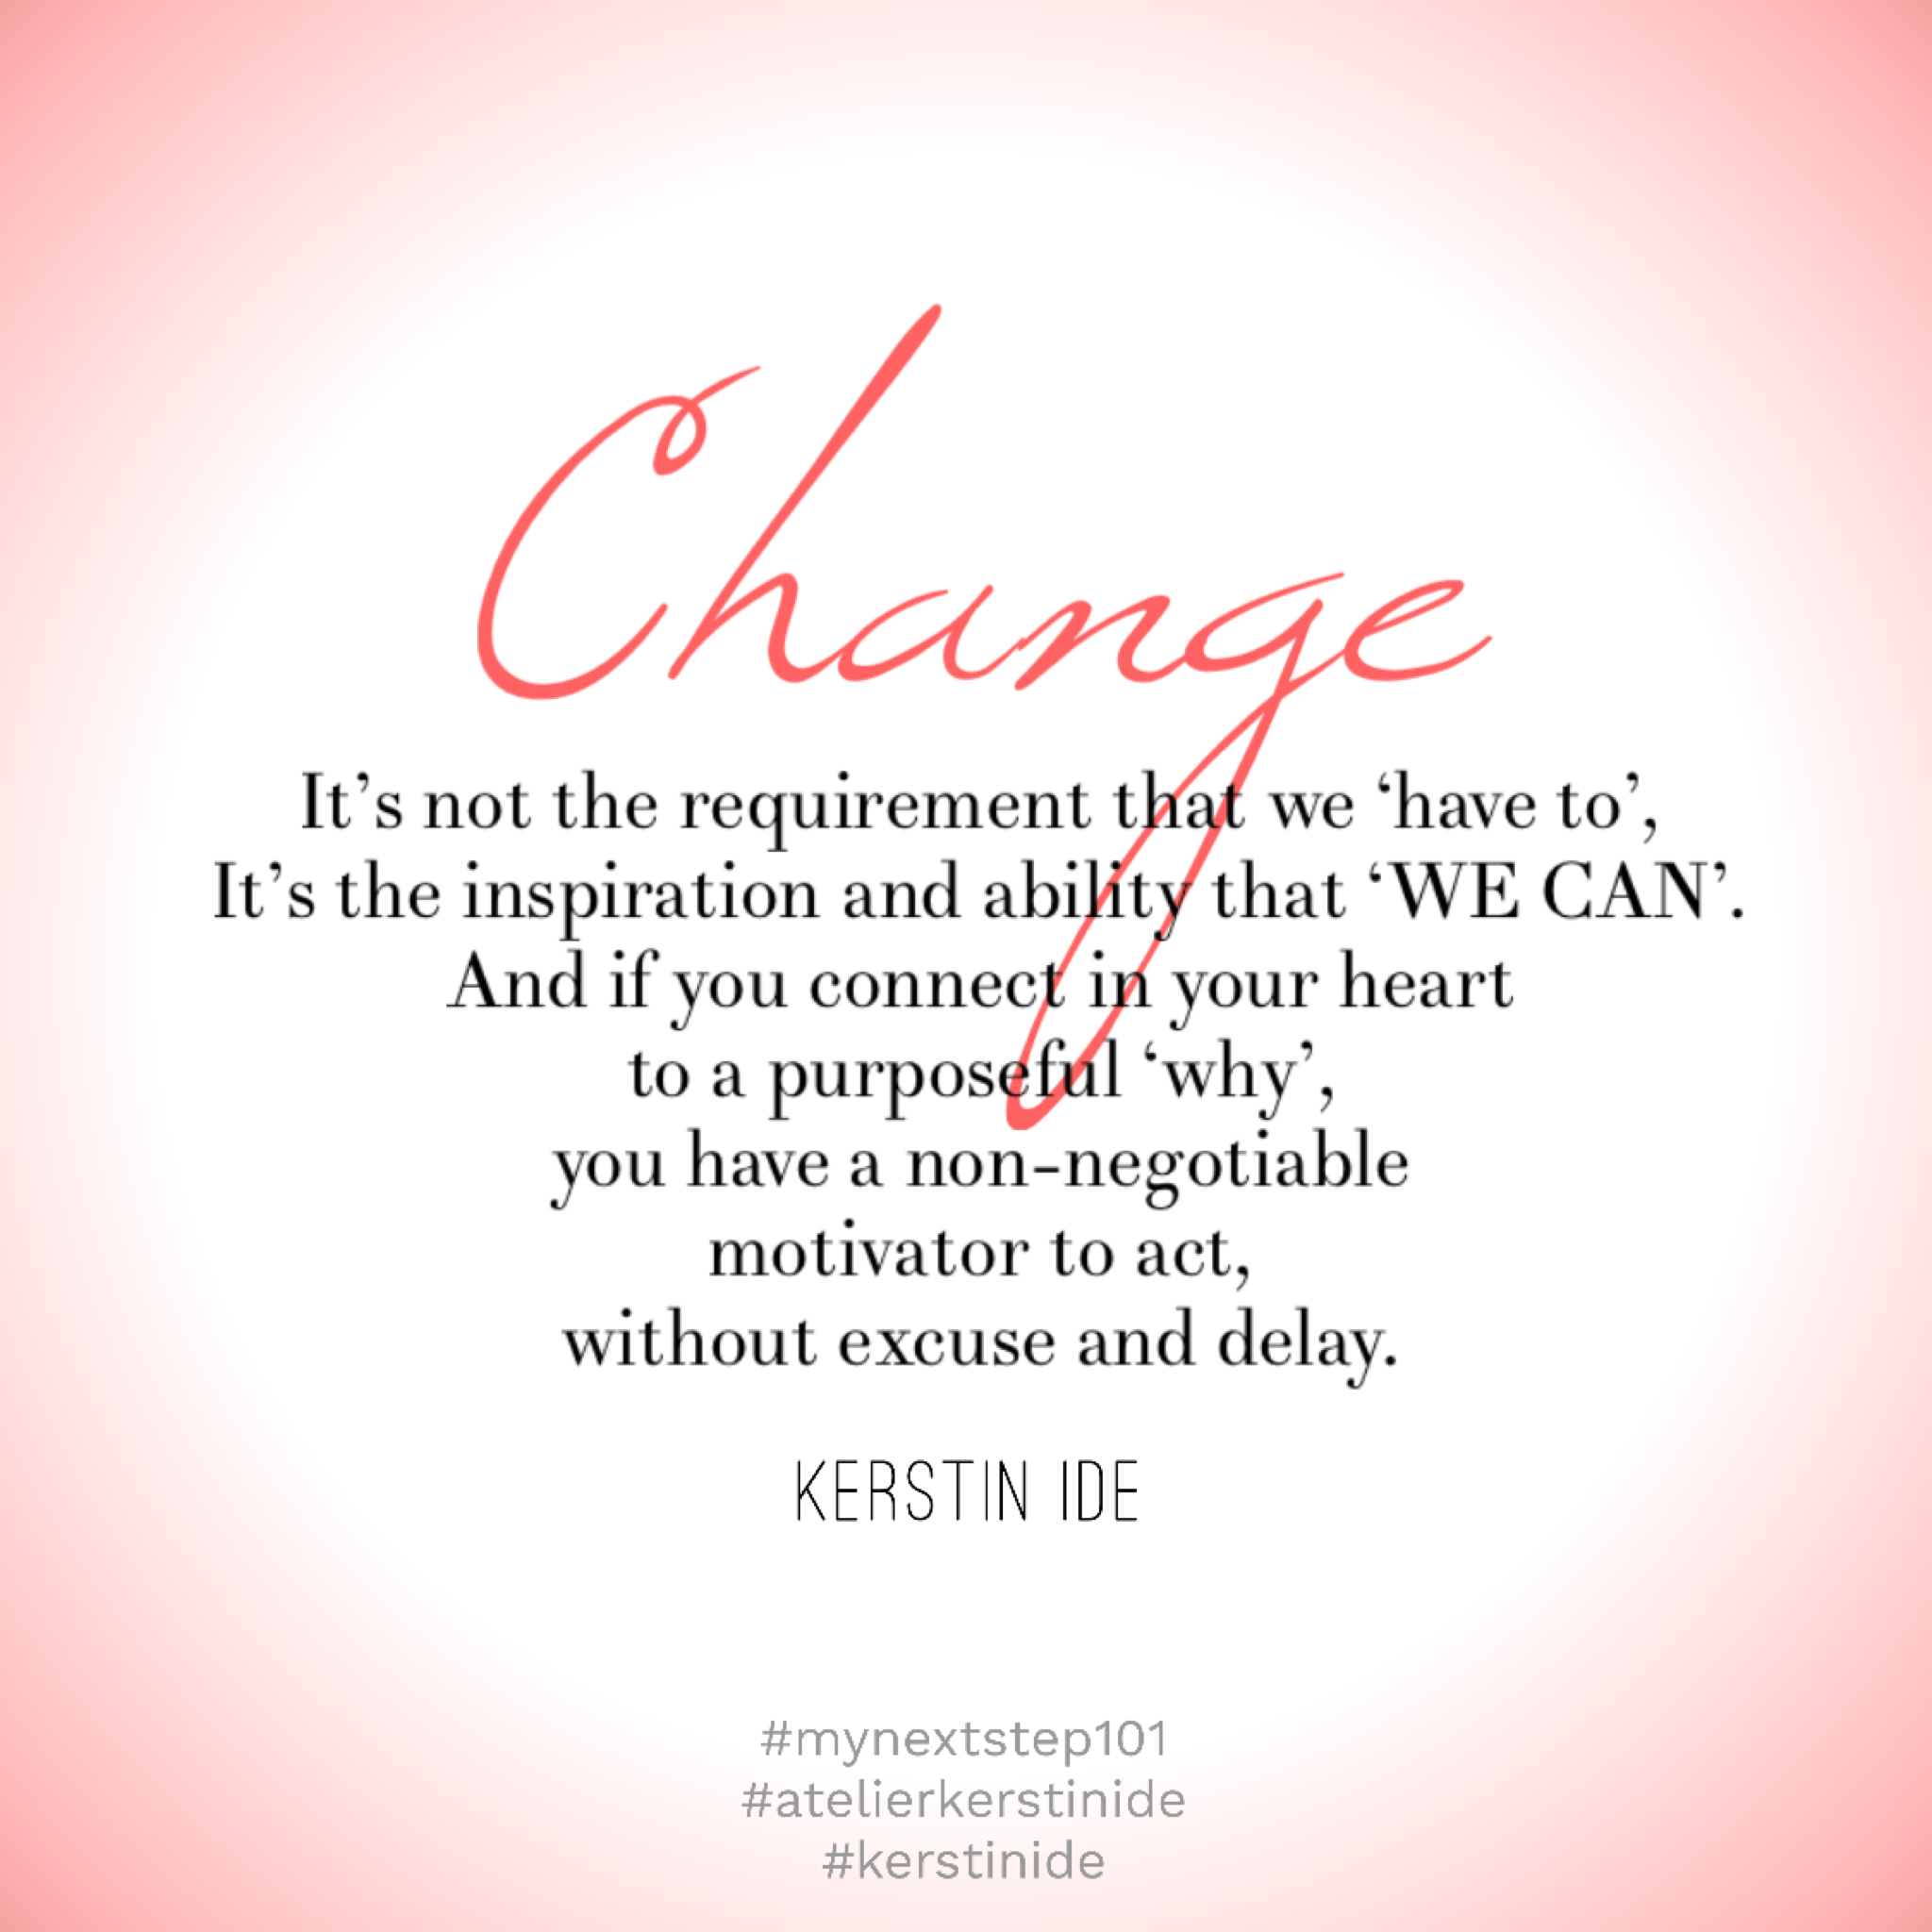 Kerstin Ide Quote
CHANGE: it’s not the requirement that we ‘have to’,
it’s the inspiration and ability that ‘WE CAN’.
And if you connect in your heart to a purposeful ‘why’, you have a non-negotiable motivator to act, without excuse or delay.